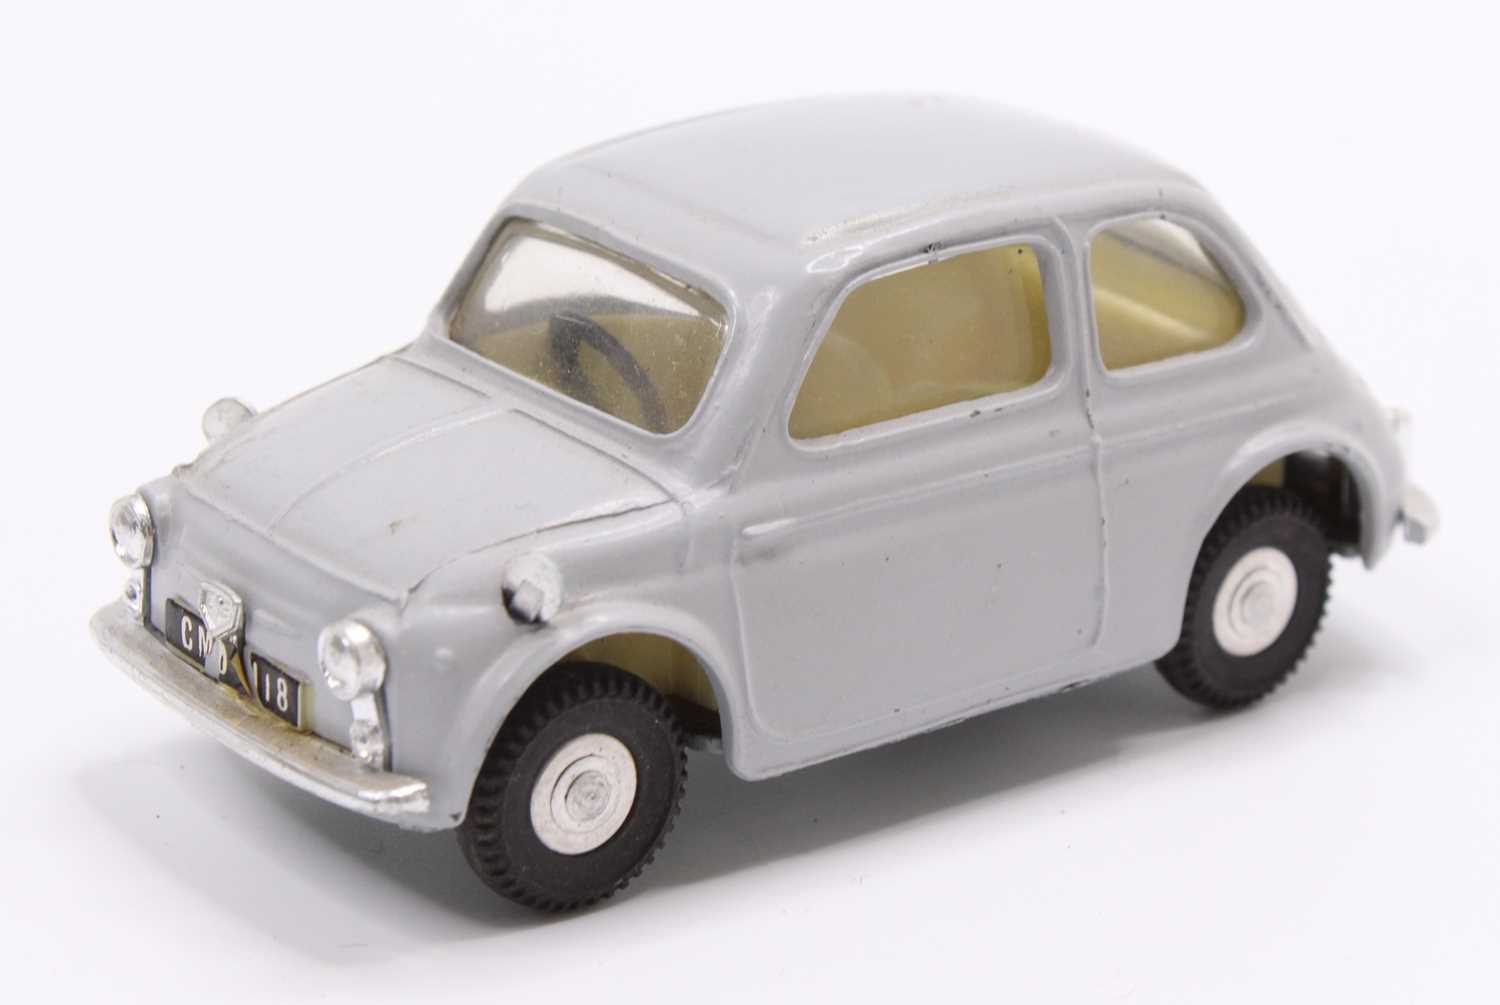 A Spot-On Models No. 185 Fiat 500 comprising grey body with yellow interior and spun hubs, missing - Image 3 of 5